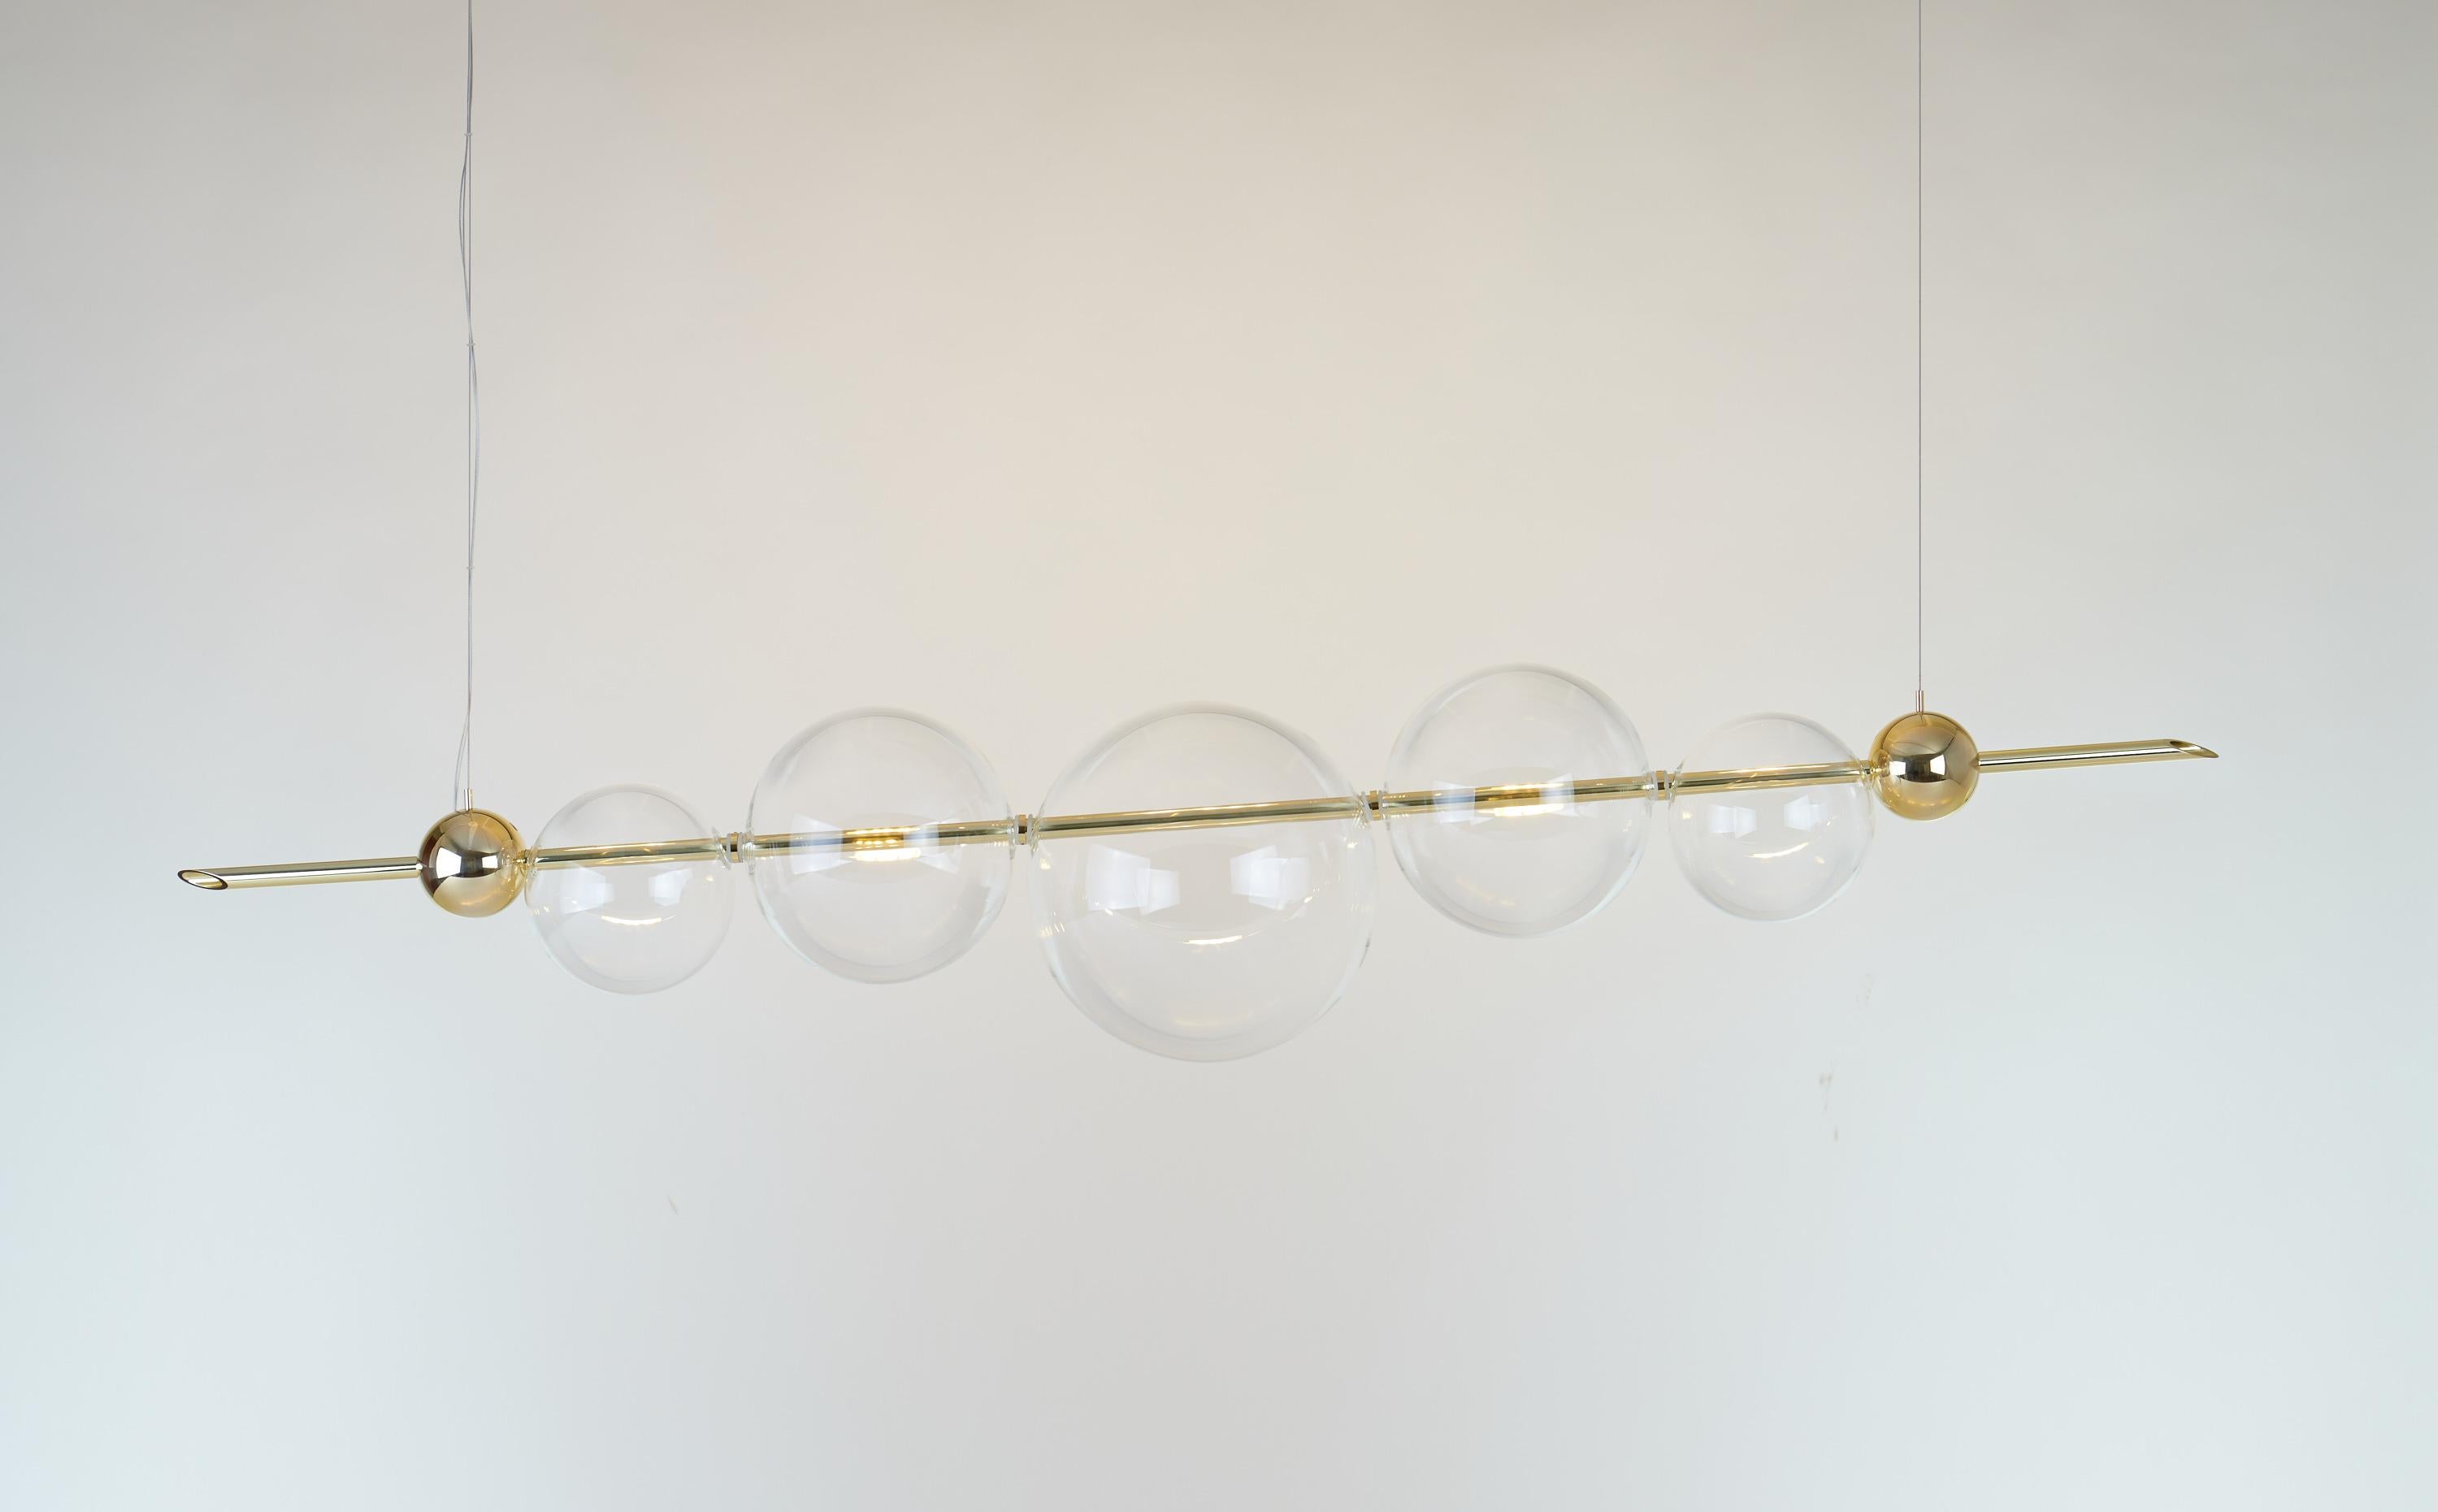 An exquisite exercise in balance, this chandelier exudes a Minimalist flair marked by clean and essential lines. Its structure features one brass bar hanging from a brass ceiling rose, and strikingly balancing a series of delicate organic globes